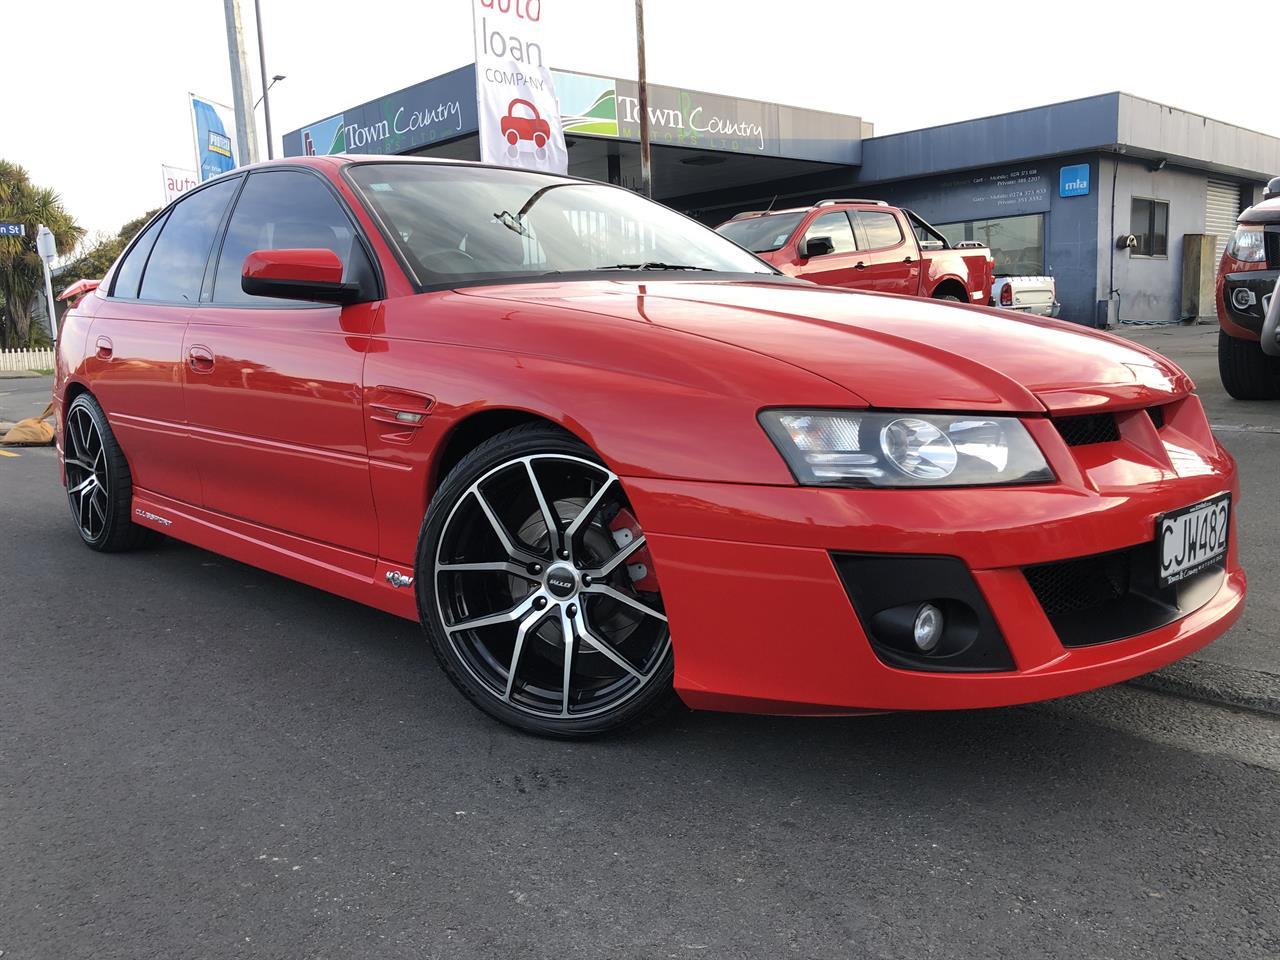 04 Holden Hsv Clubsport Vz Ls2 6 0l For Sale In Christchurch